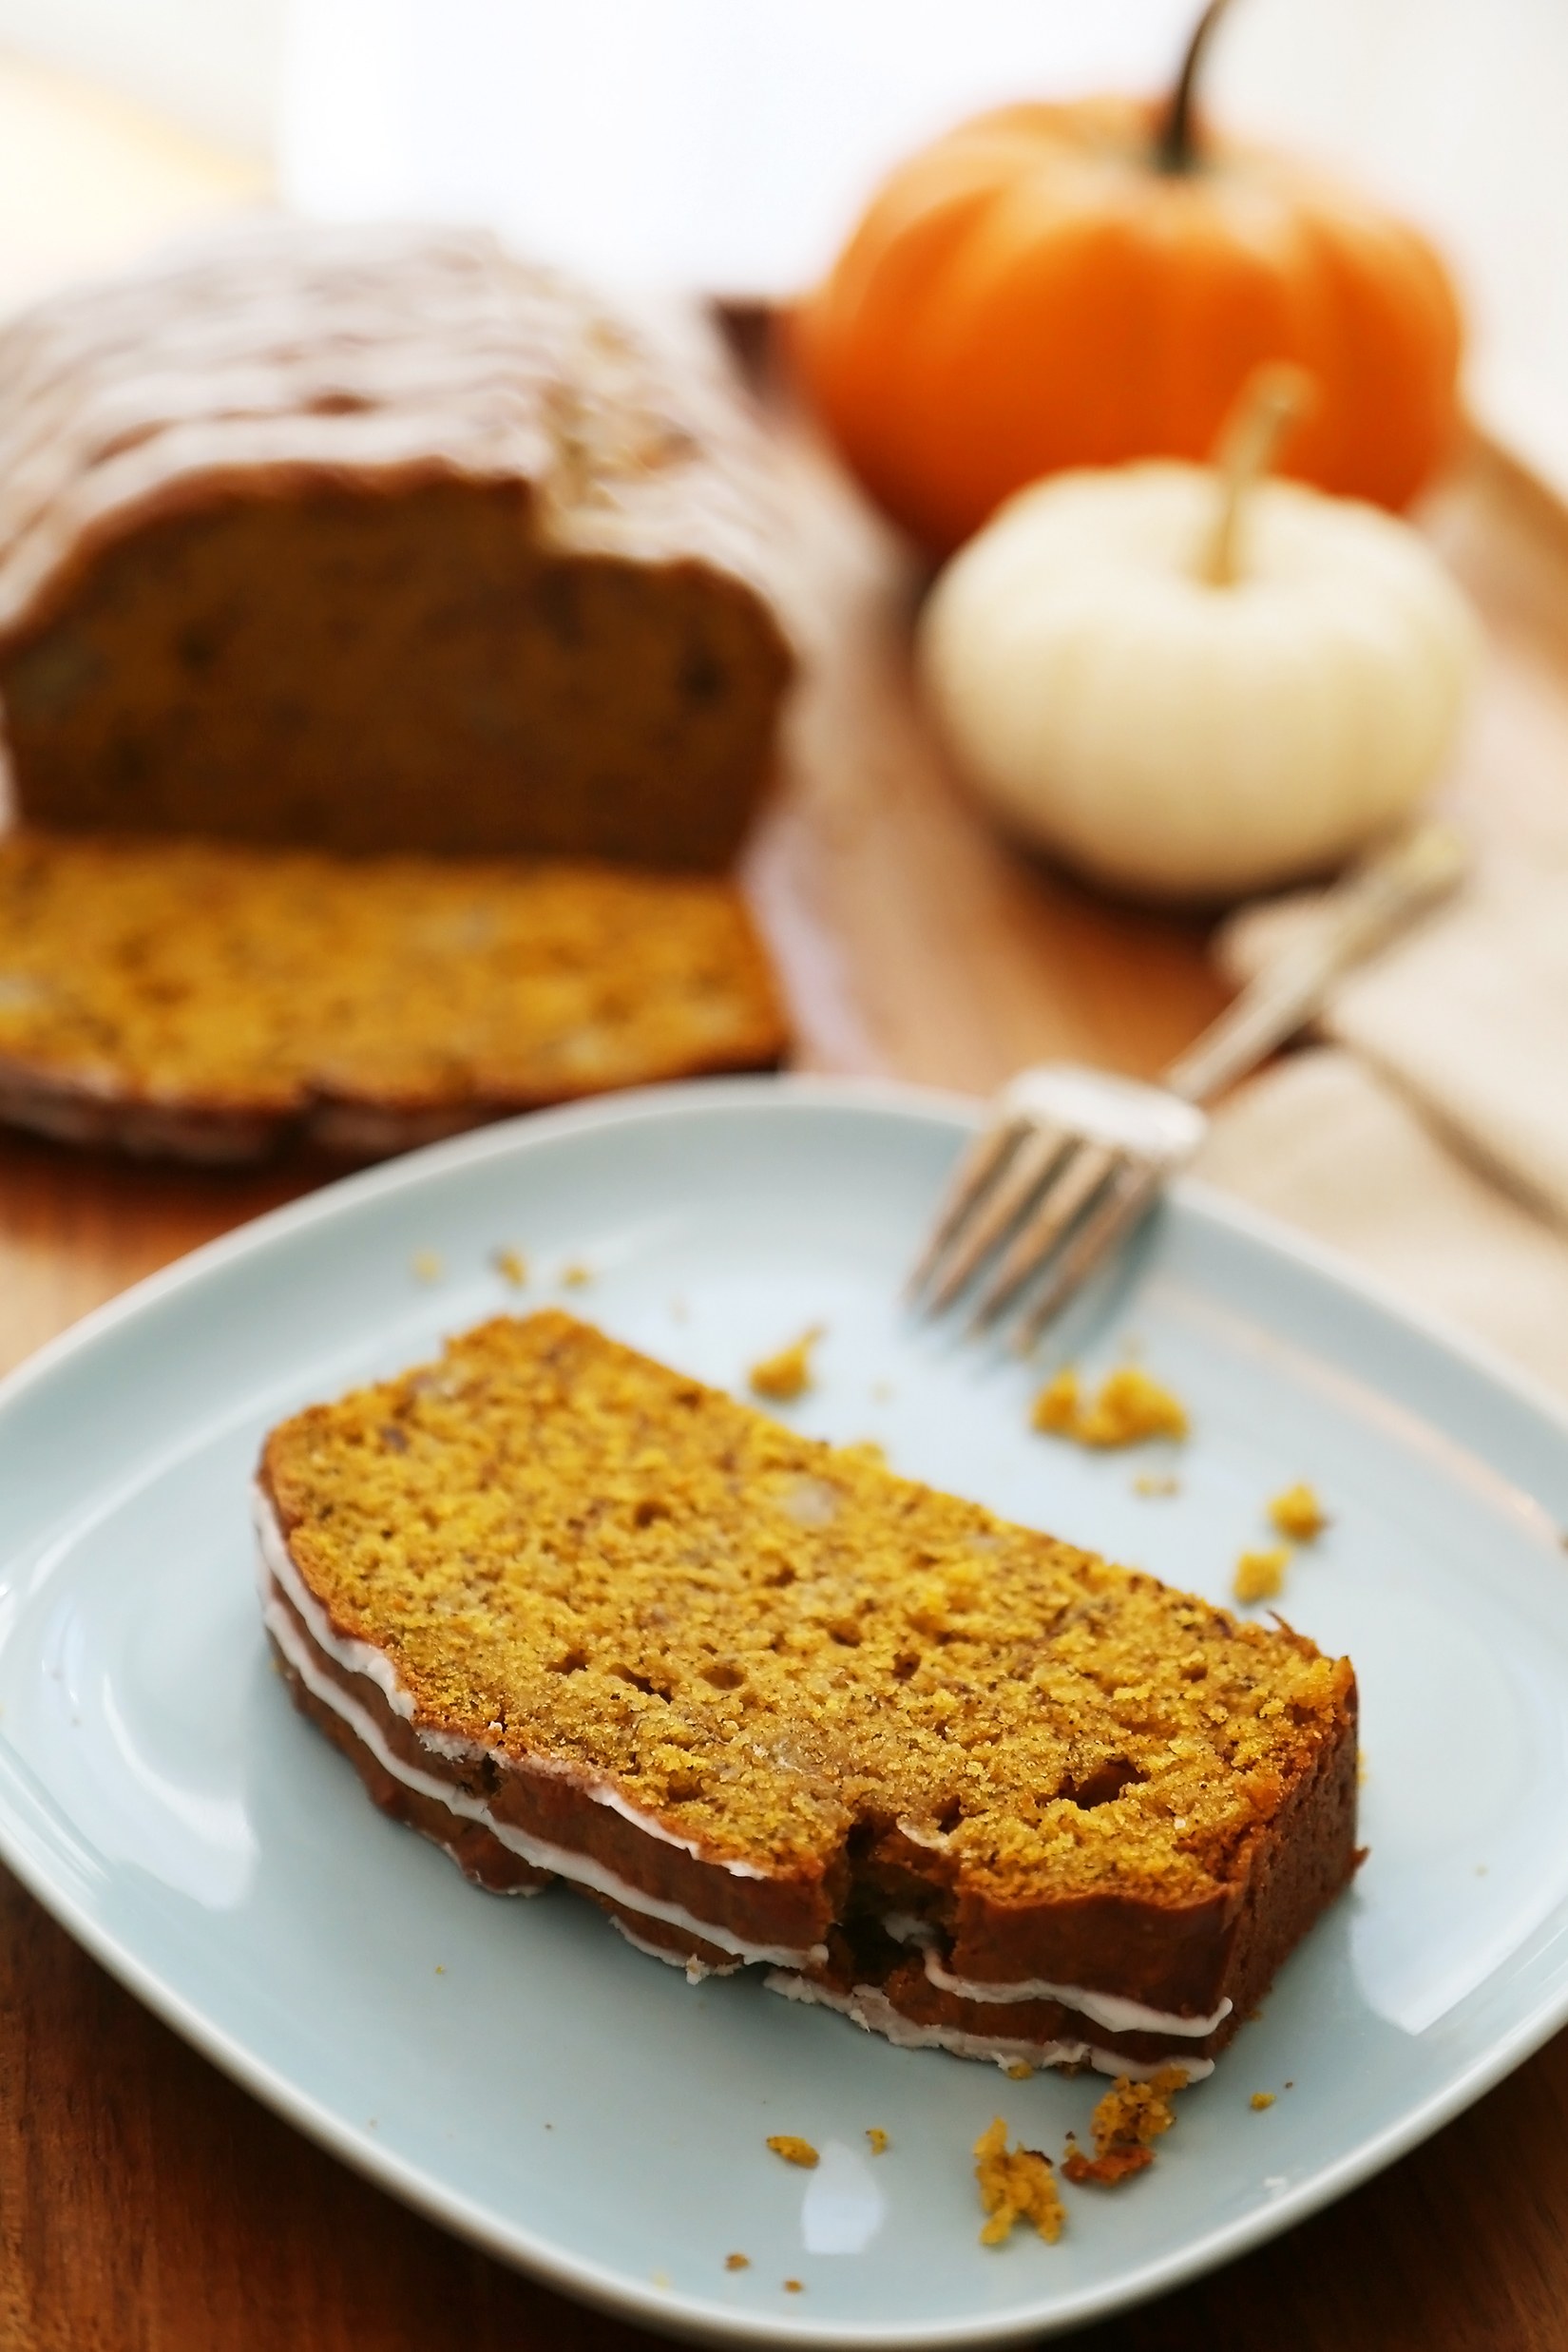 Pumpkin Banana Bread with Vanilla Glaze - Super moist, fluffy pumpkin-banana bread easily baked from scratch! Perfect for gifting or enjoying for breakfast, brunch or dessert. Thecomfortofcooking.com